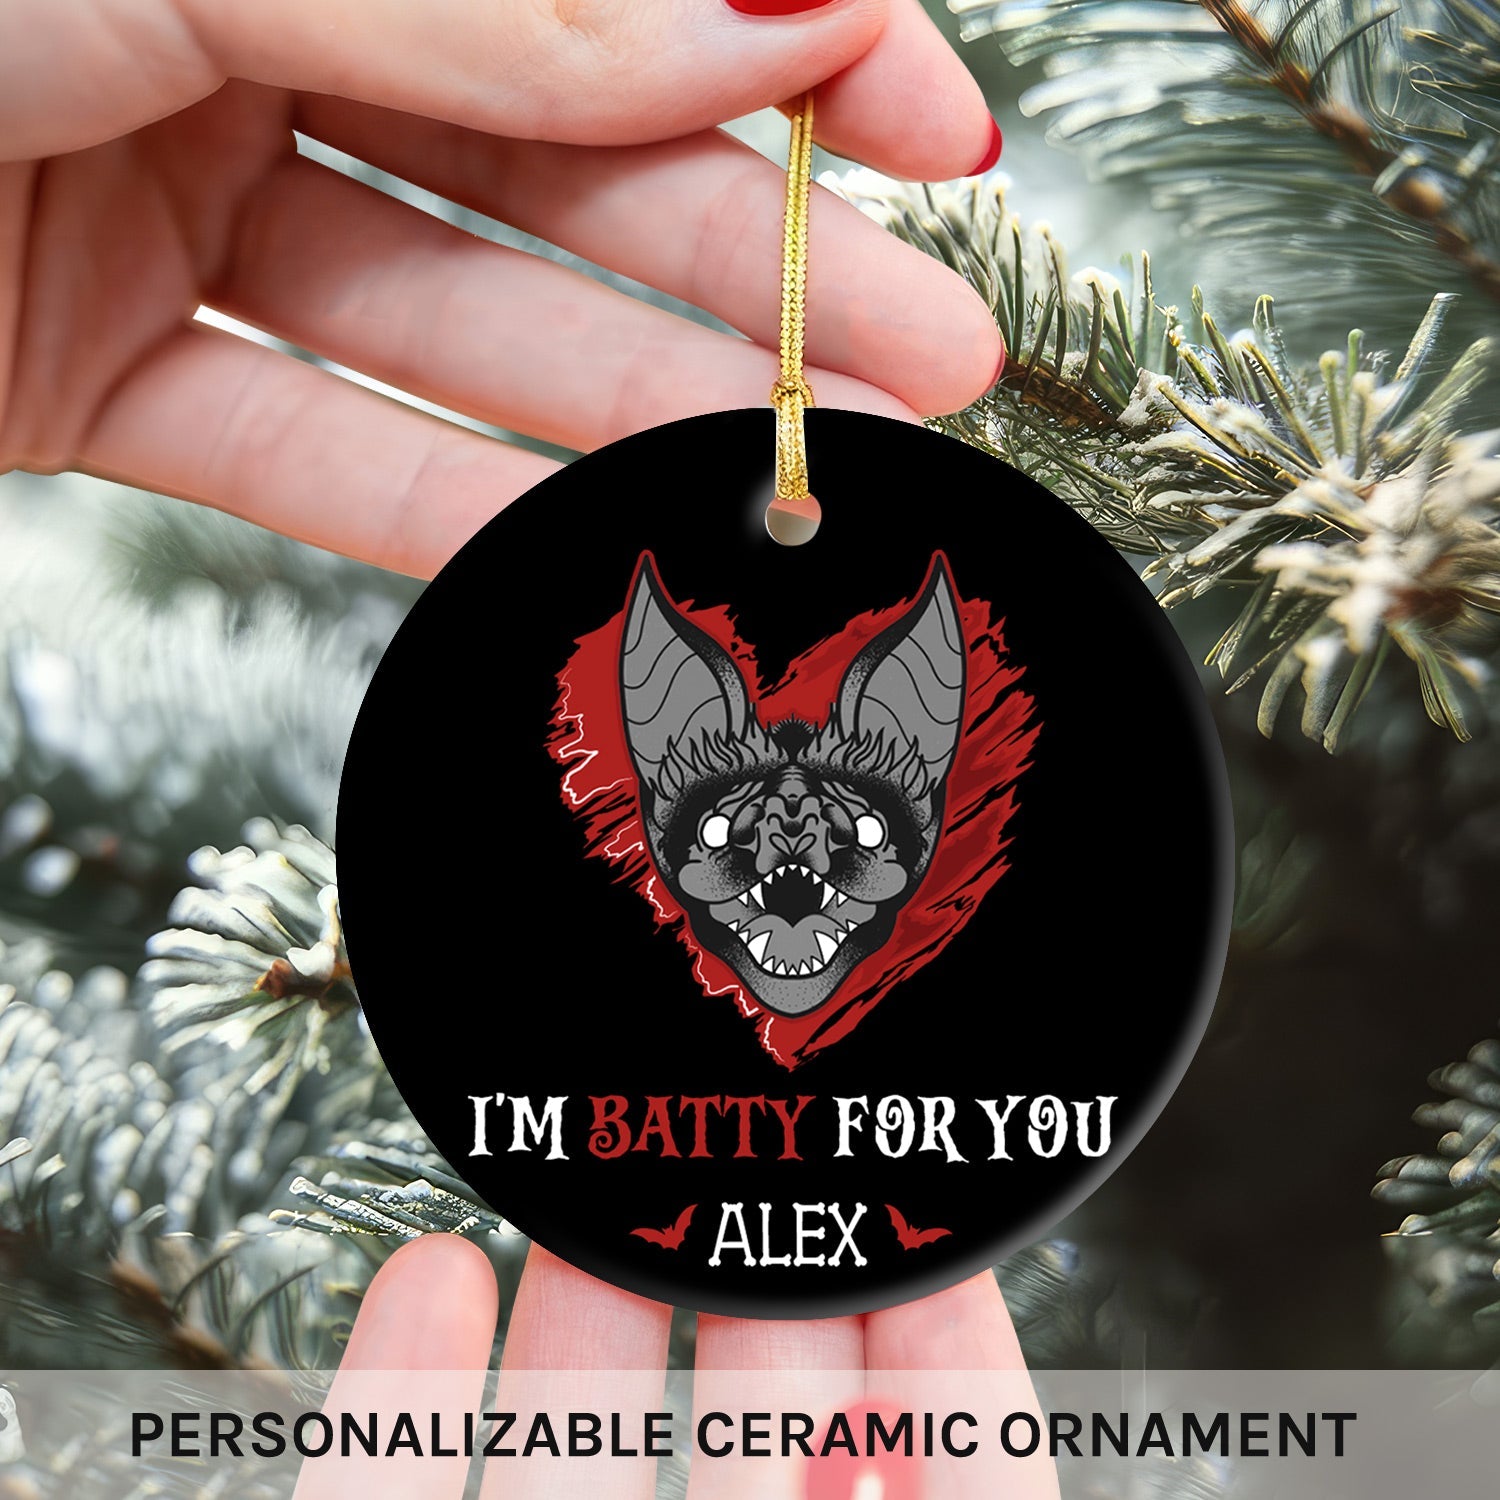 I'm Batty For You - Personalized Anniversary or Halloween gift for Boyfriend or Girlfriend - Custom Circle Ceramic Ornament - MyMindfulGifts